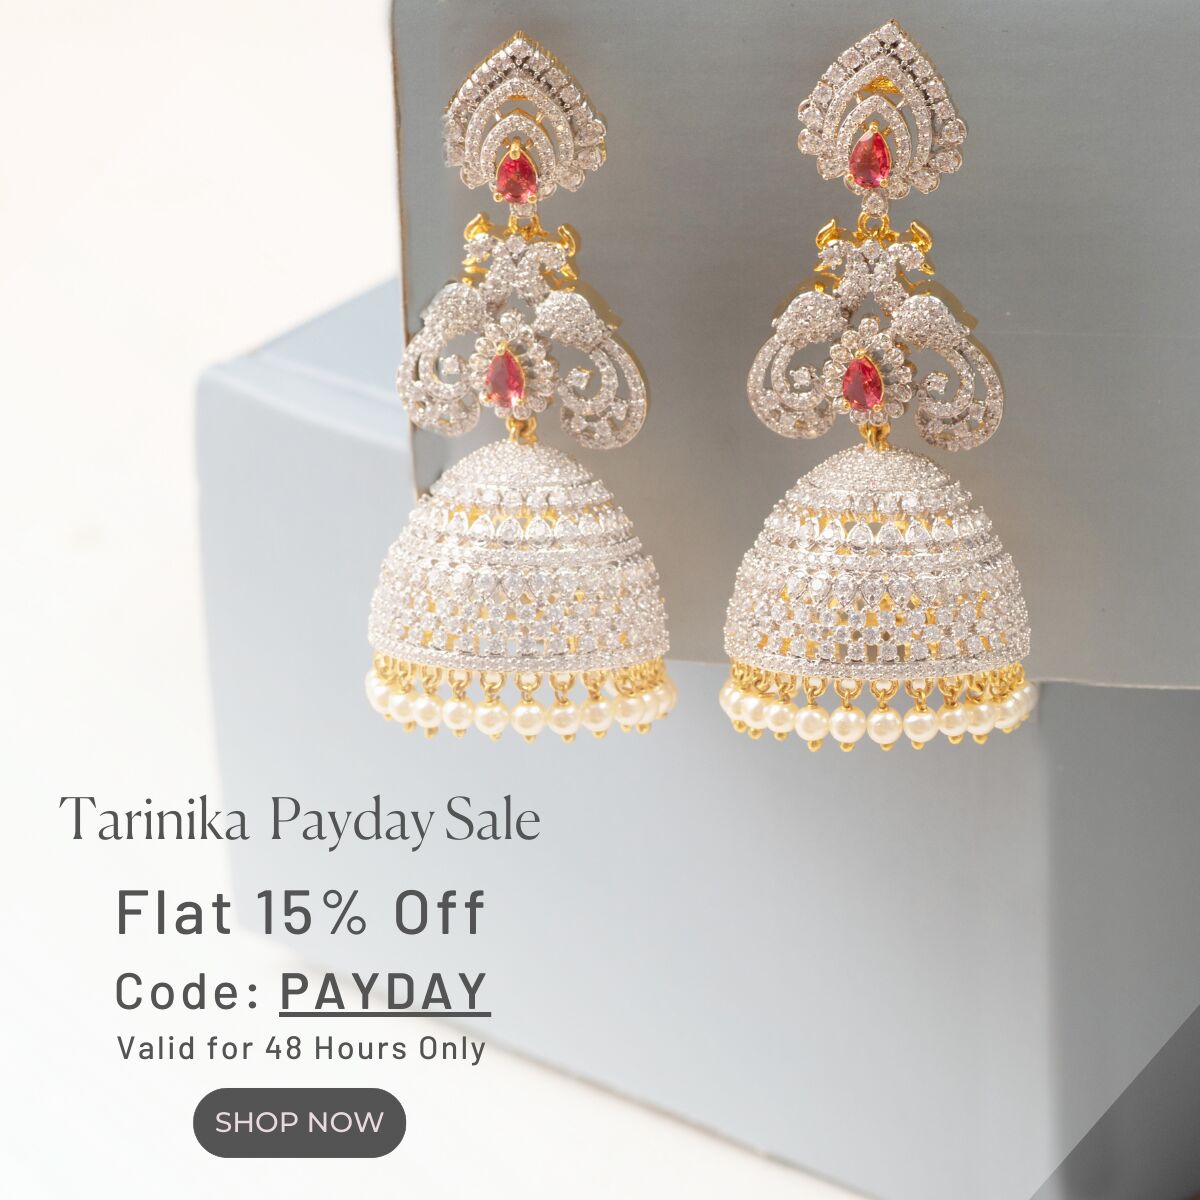  Tarinika Payday Sale Flat 15% Off Code: PAYDAY Valid for 48 Hours Only SHOP NOW 